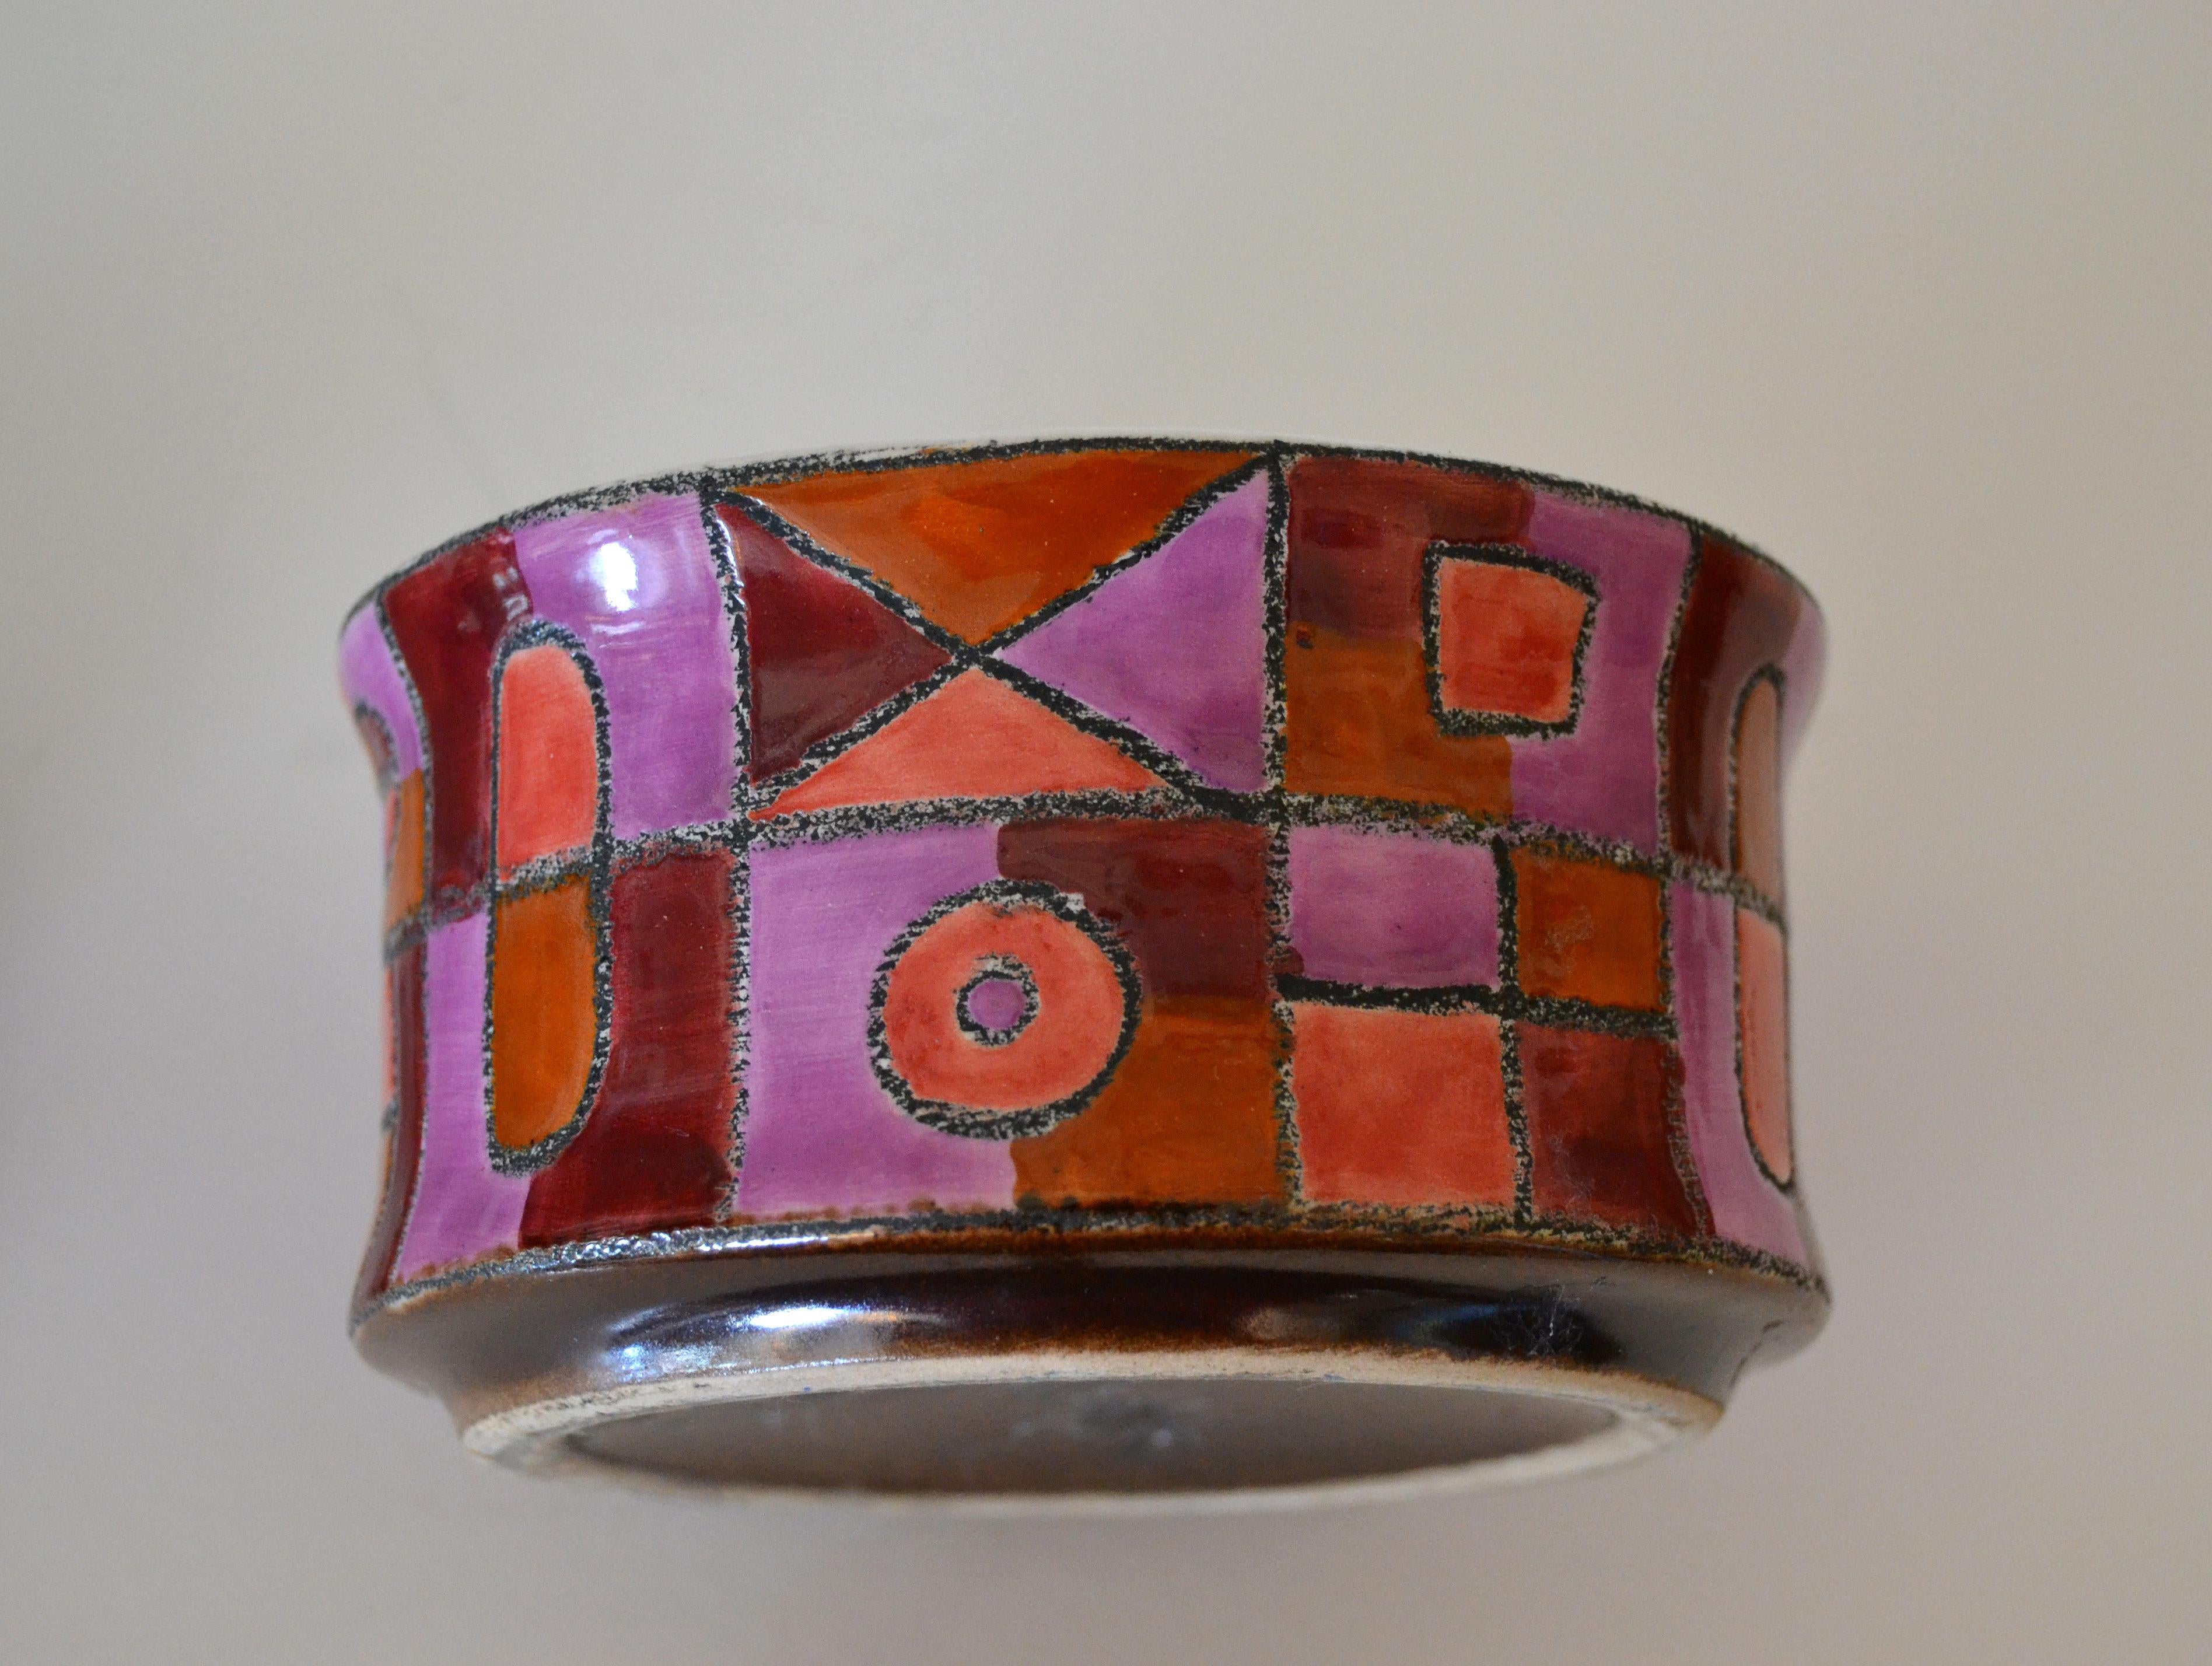 20th Century Marked Ceramic Sugar Bowl with Lid in Purple, Bronze & Shades of Maroon Color